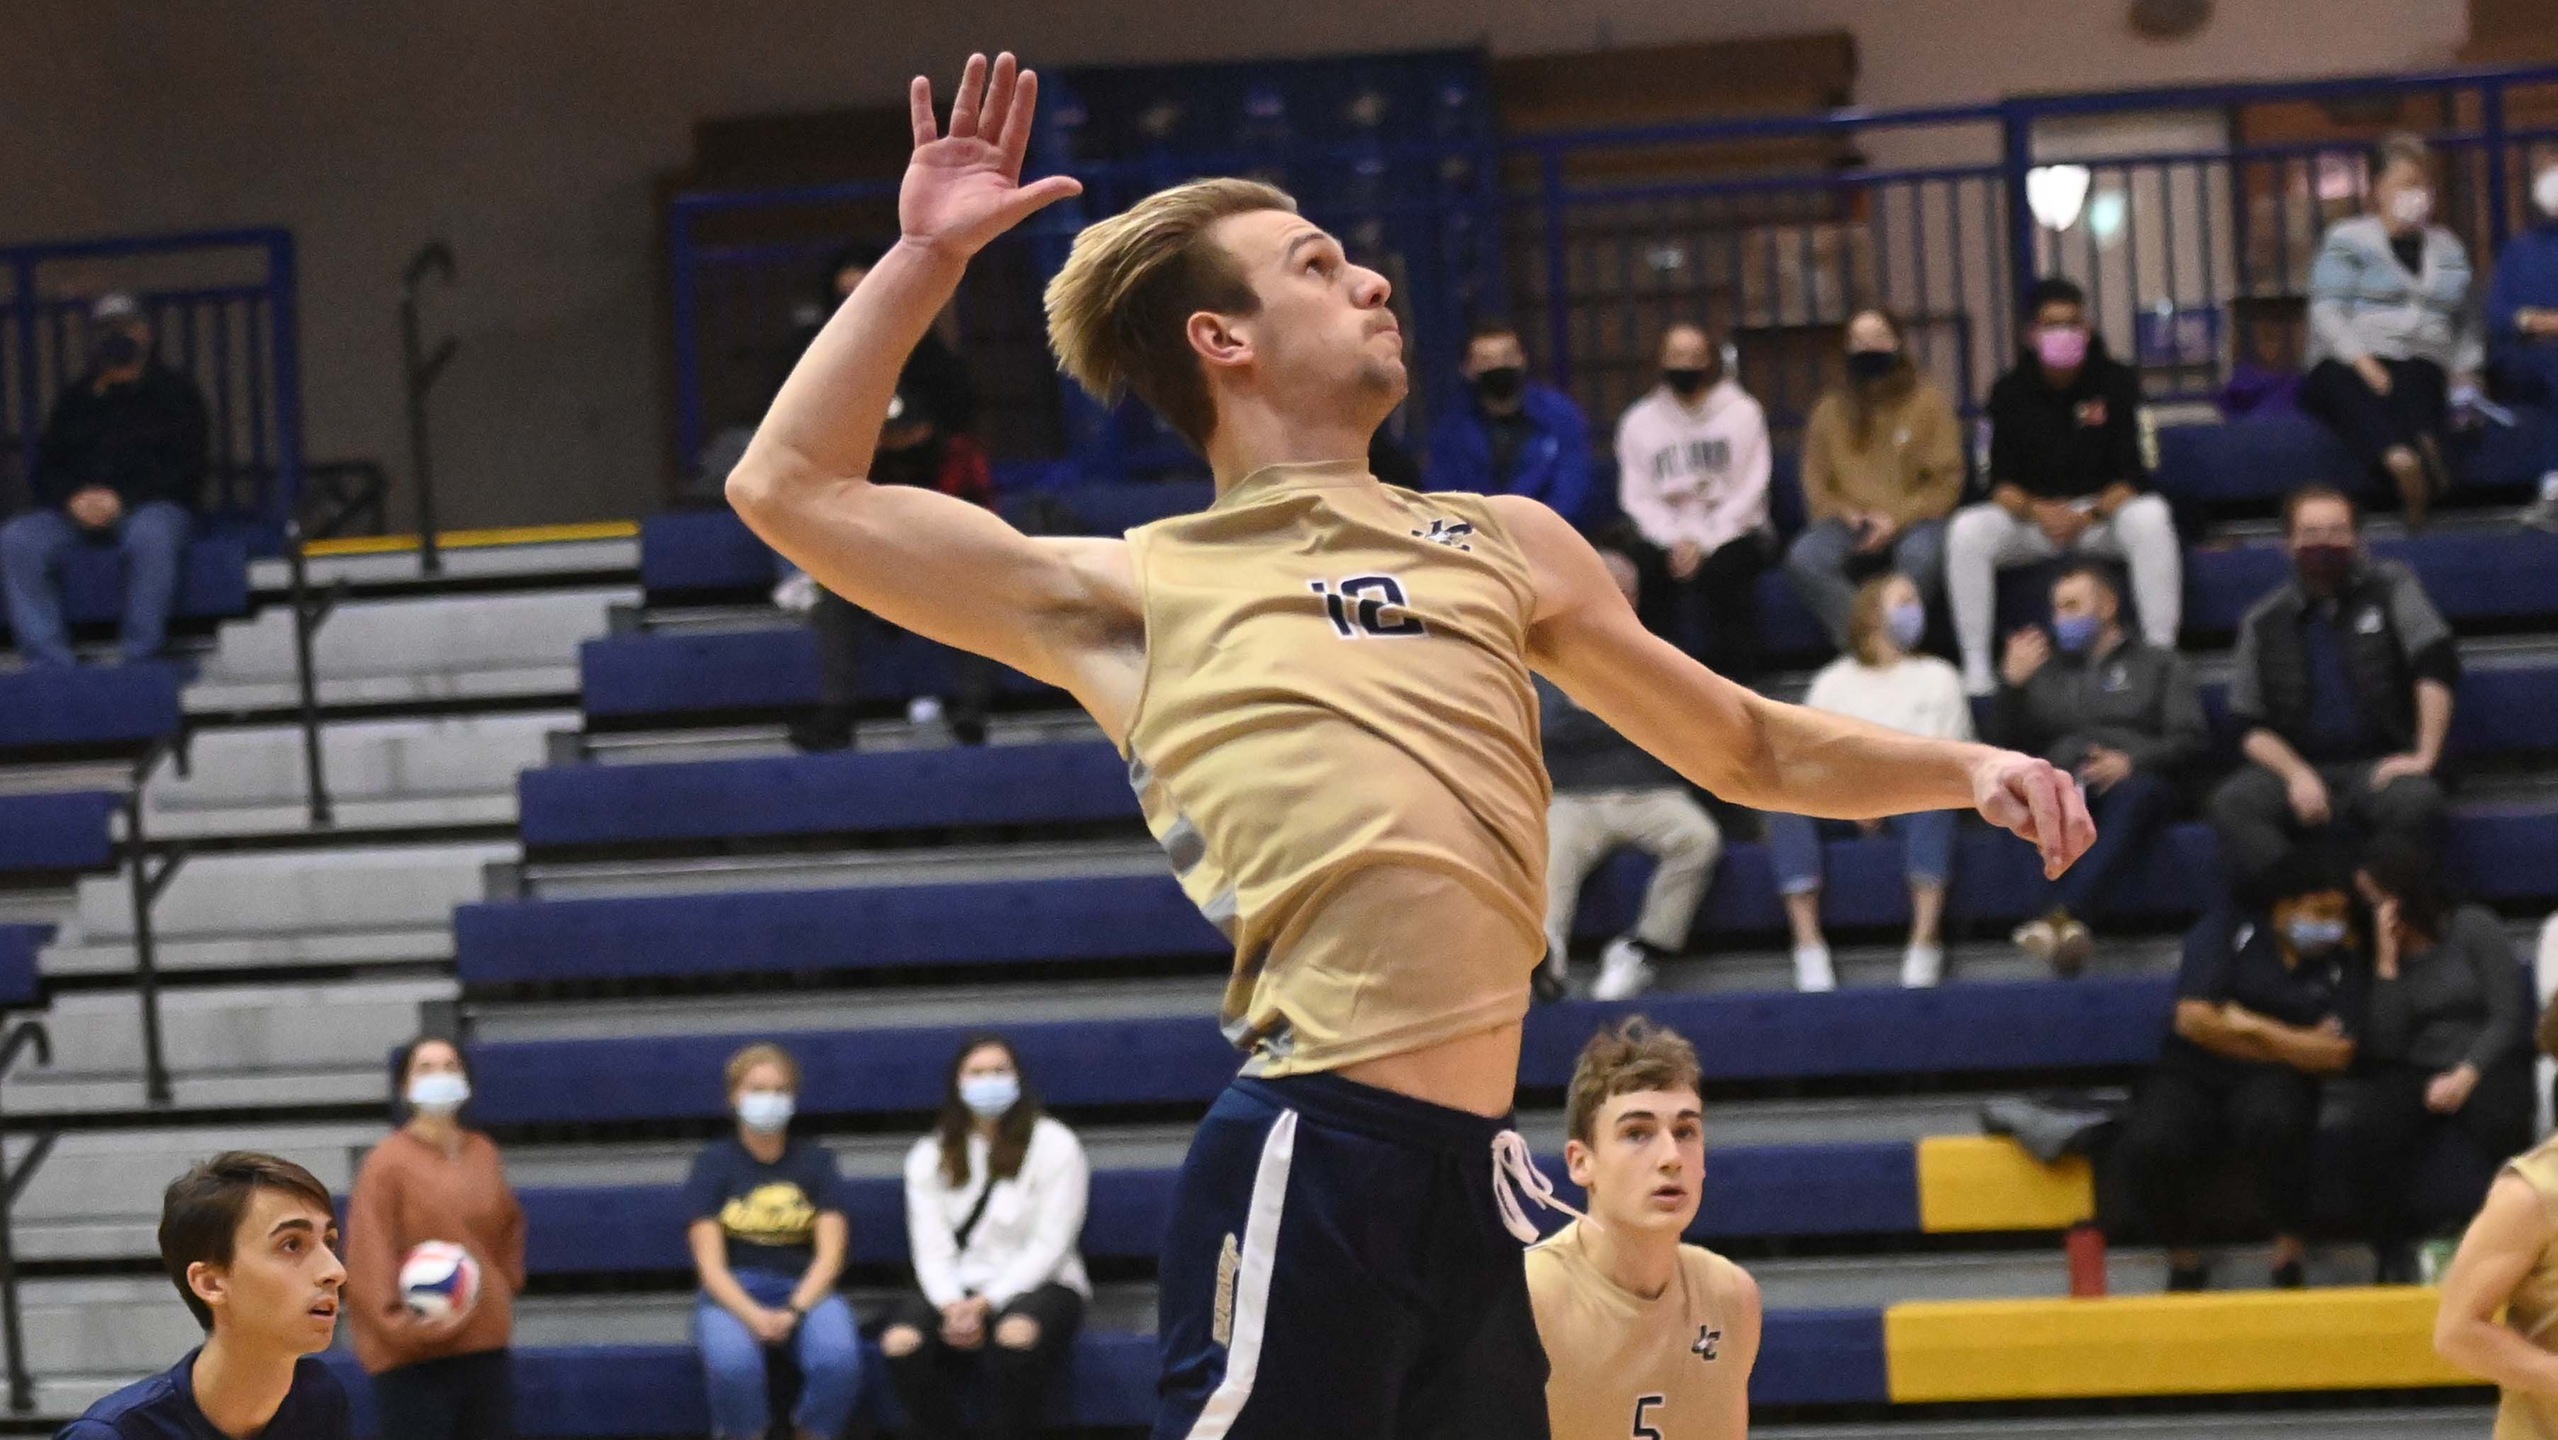 Eagles Dominate in Sweep Over Bearcats